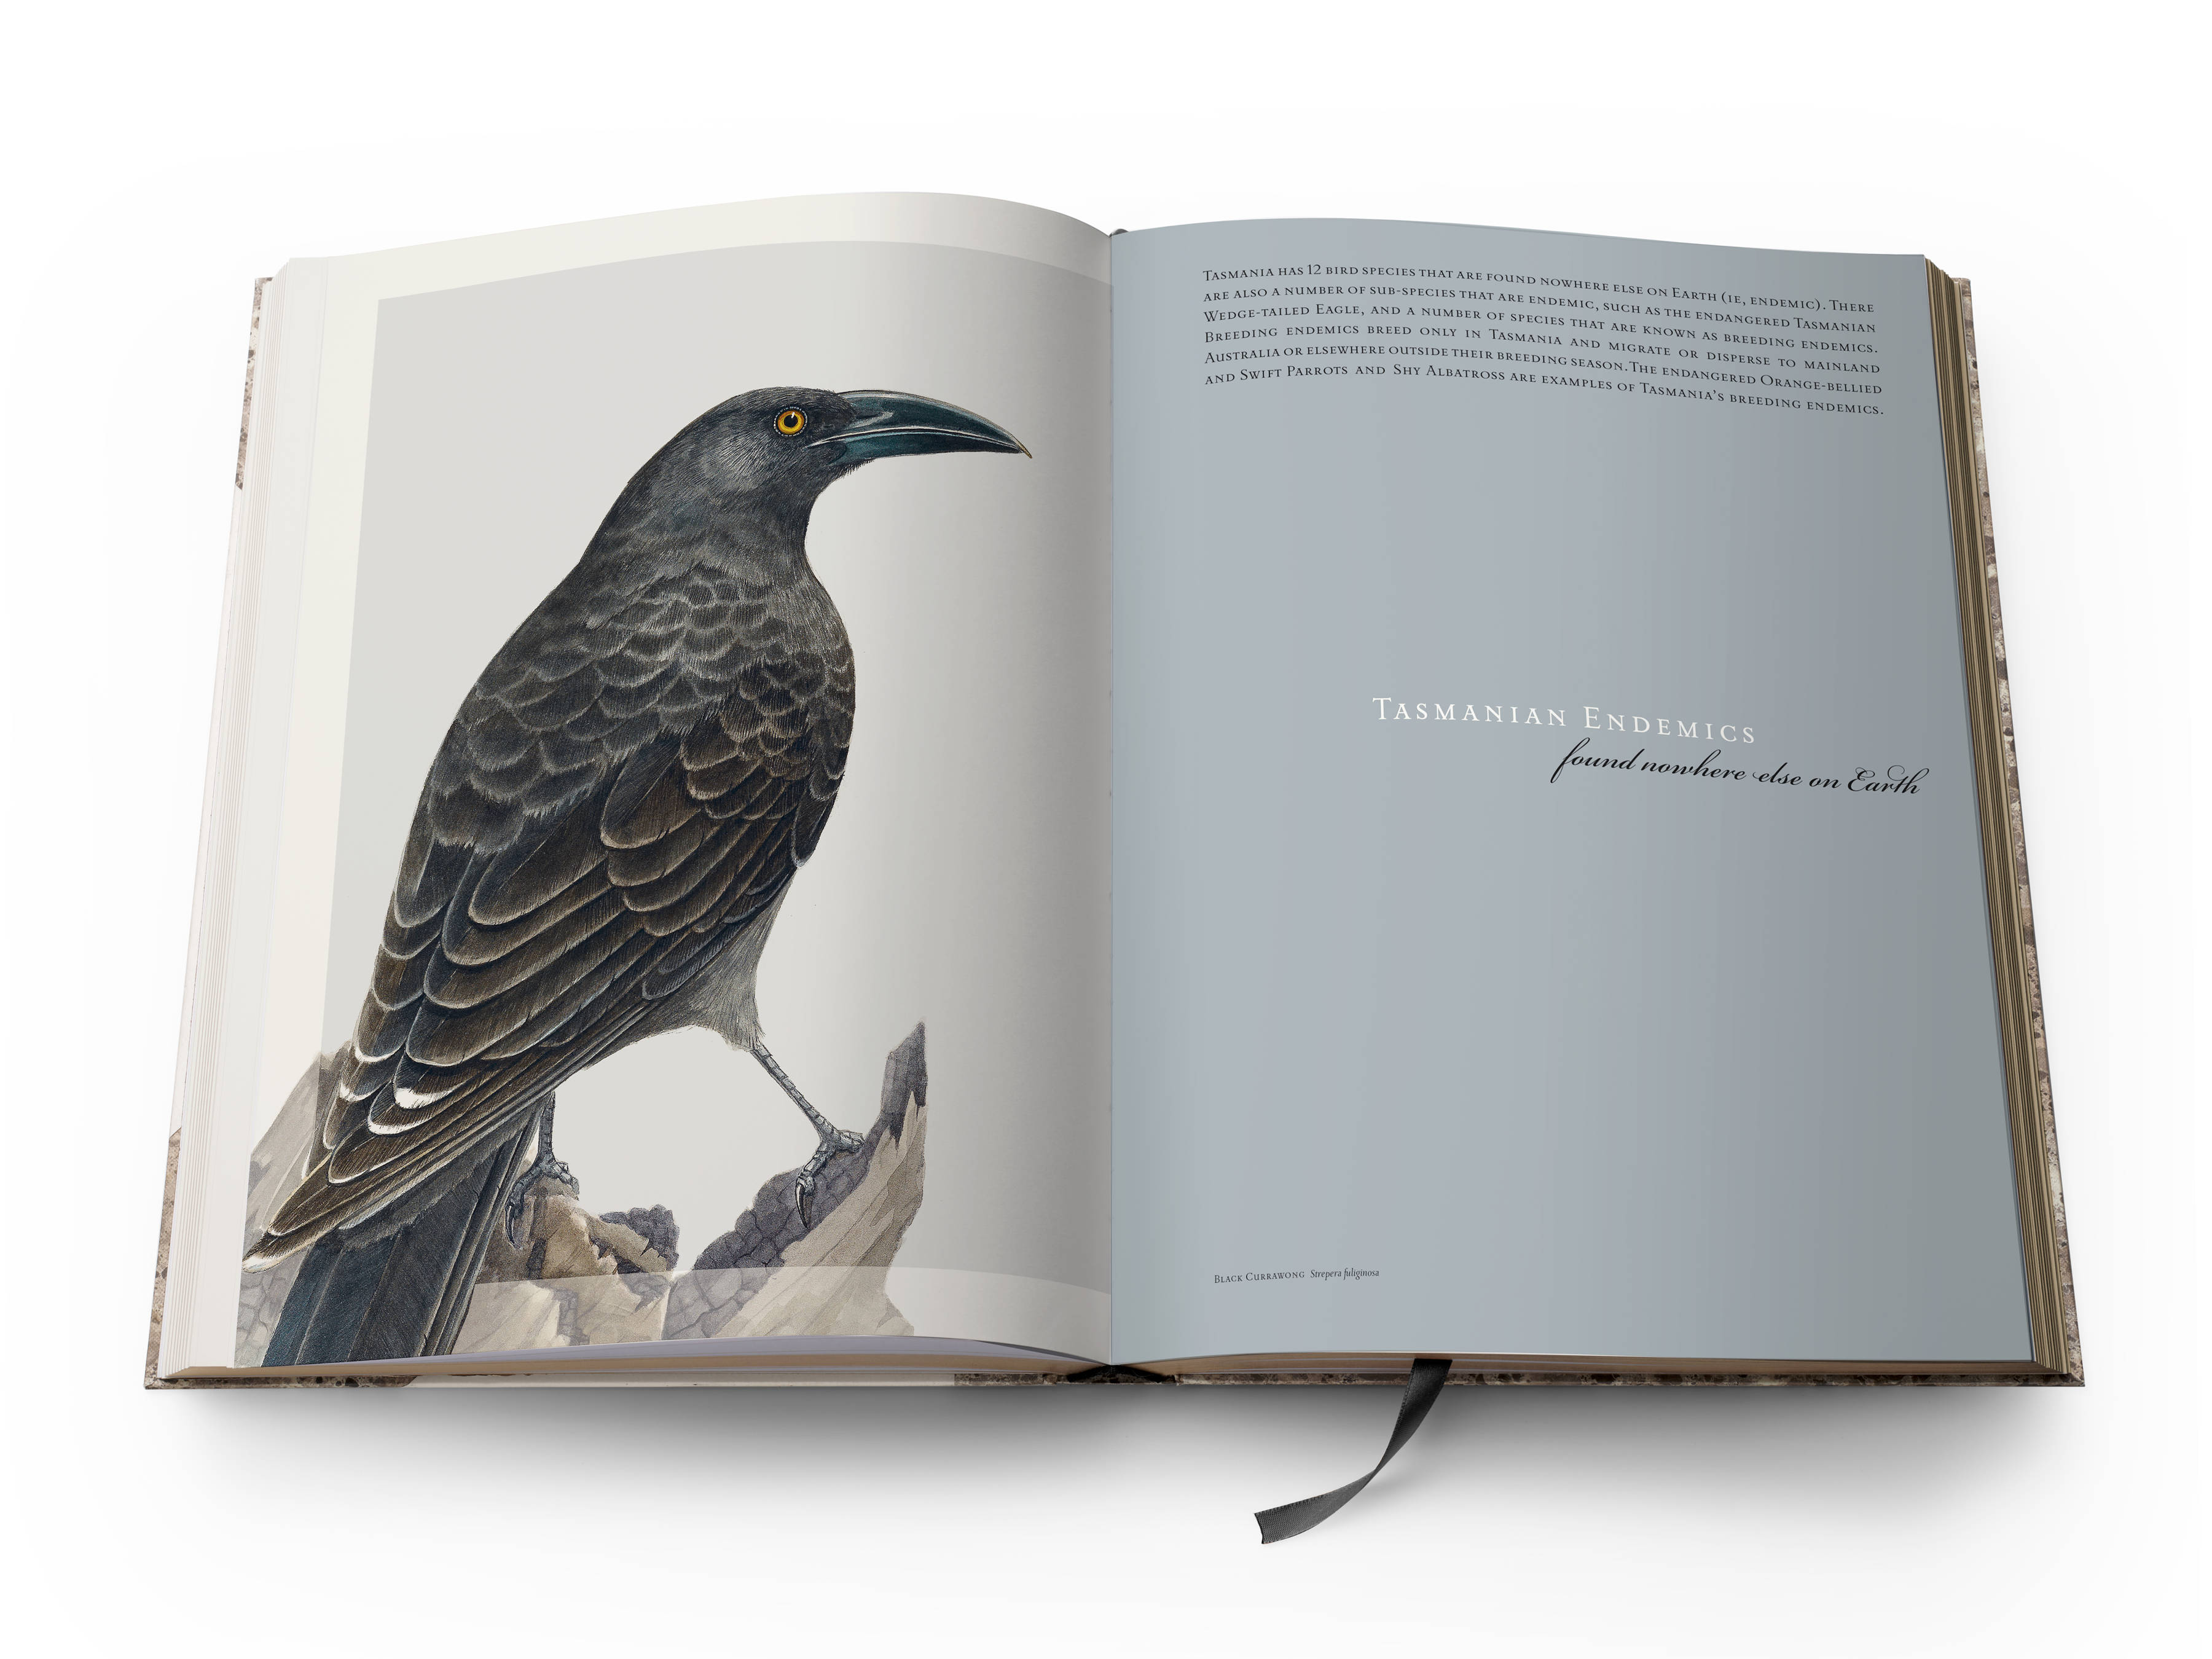 A double page spread from the book with a full-page colour plate of a Black Currawong ‘Strepera fuliginosa’ on the left and the title of the section Tasmanian Endemics, Found nowhere else on Earth on the right.